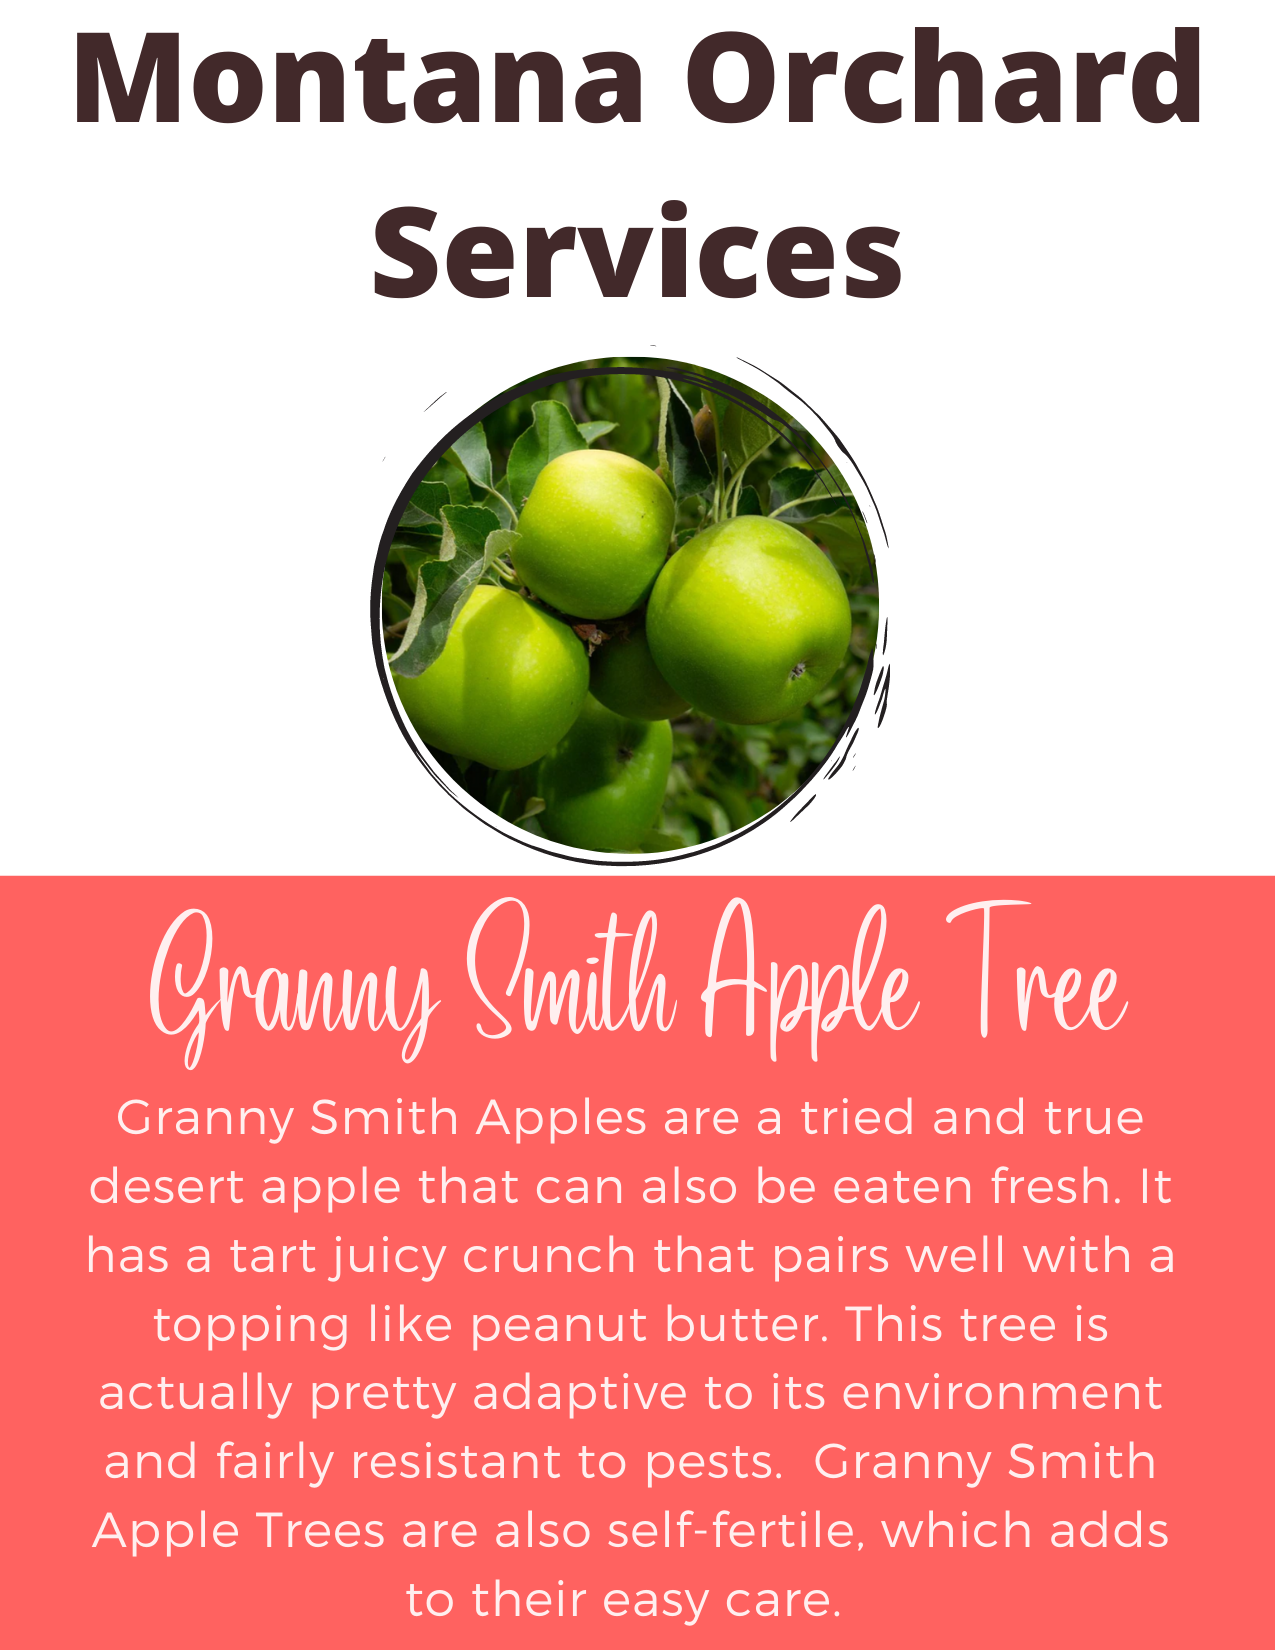 https://mtorchardservices.com/wp-content/uploads/2022/04/Granny-Smith-Card.png